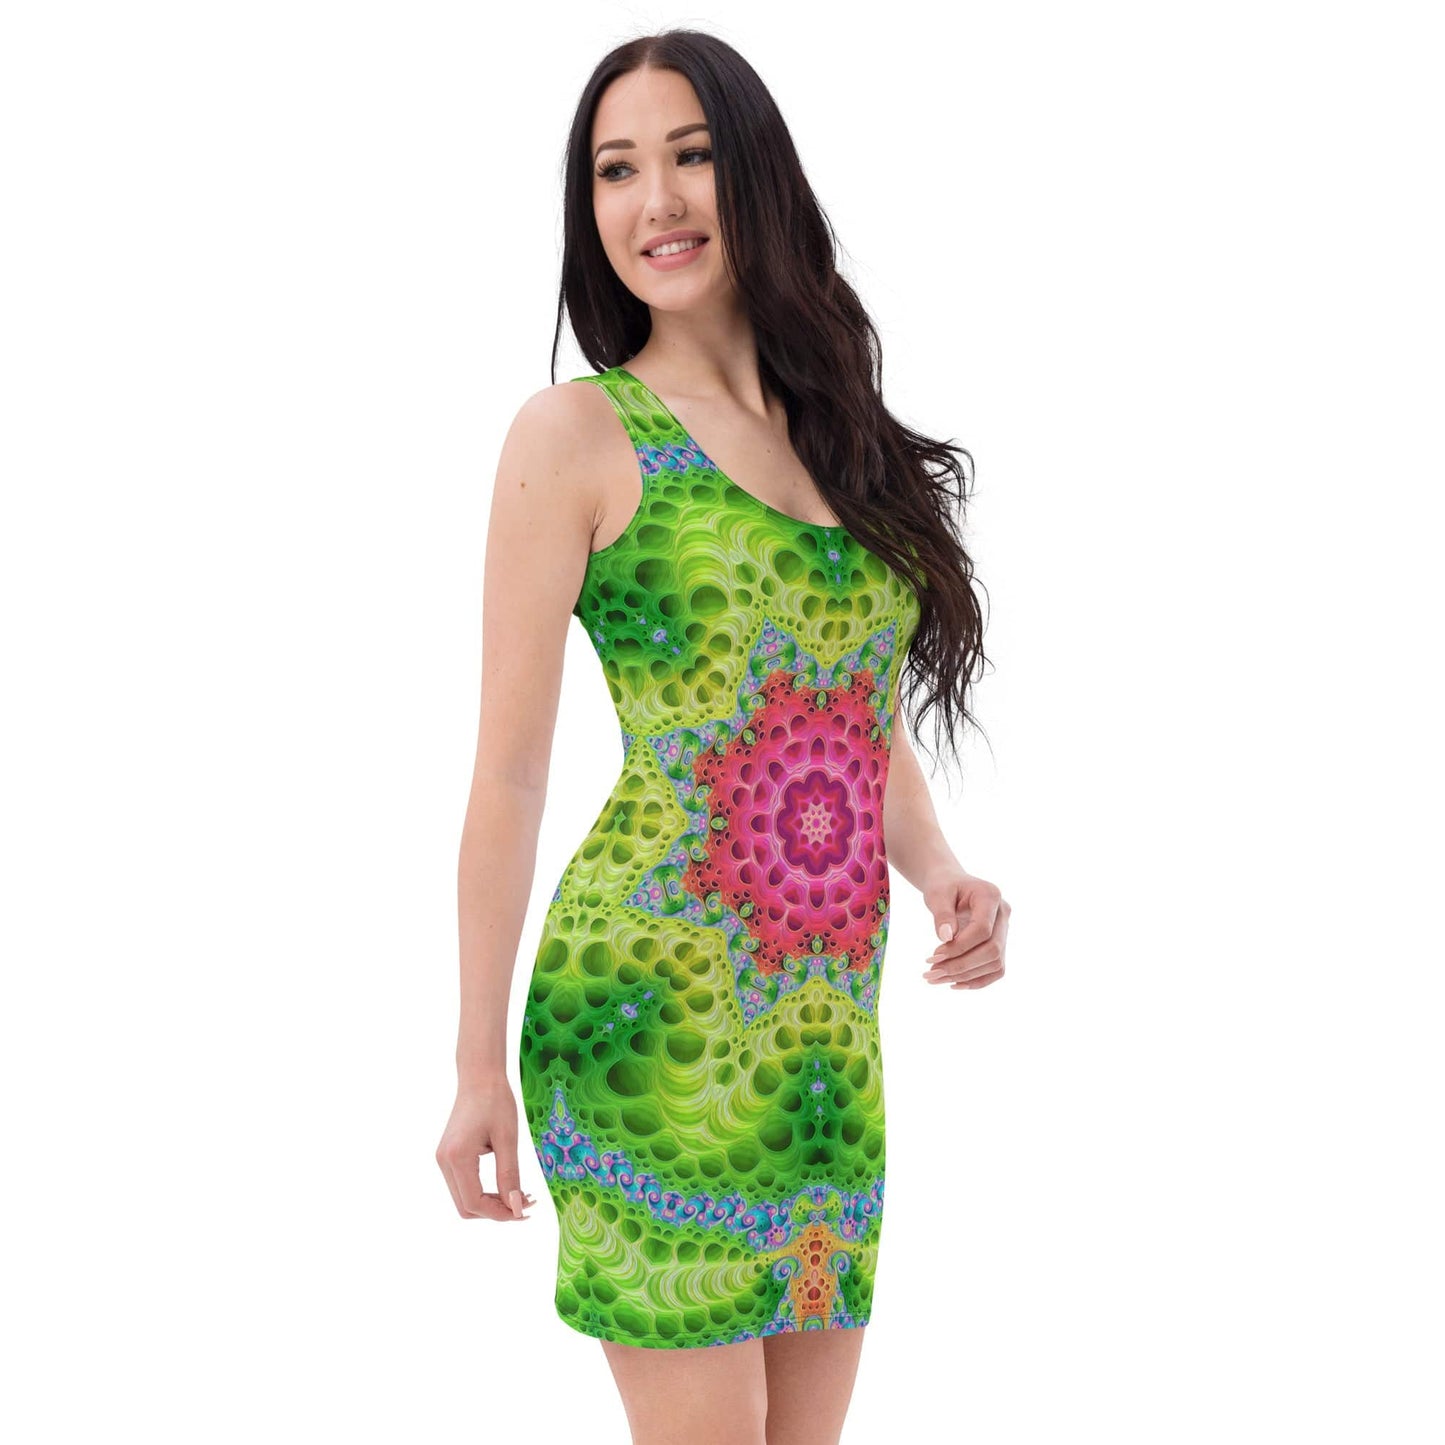 "Starburst" Bodycon FITTED DRESS